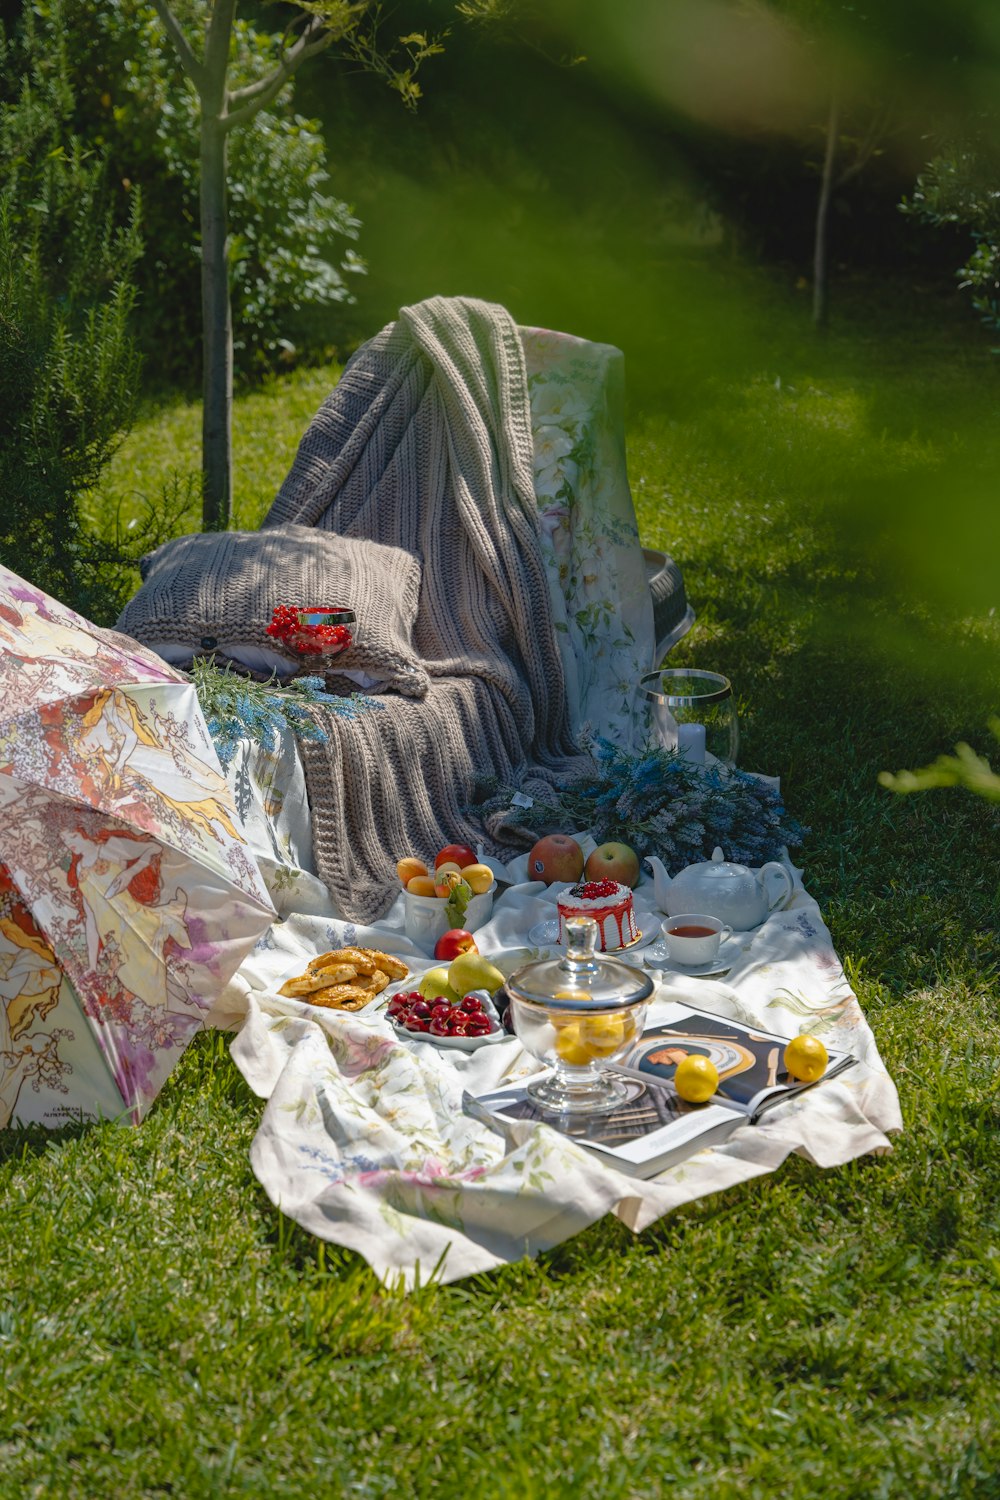 a picnic set up in the grass with an umbrella